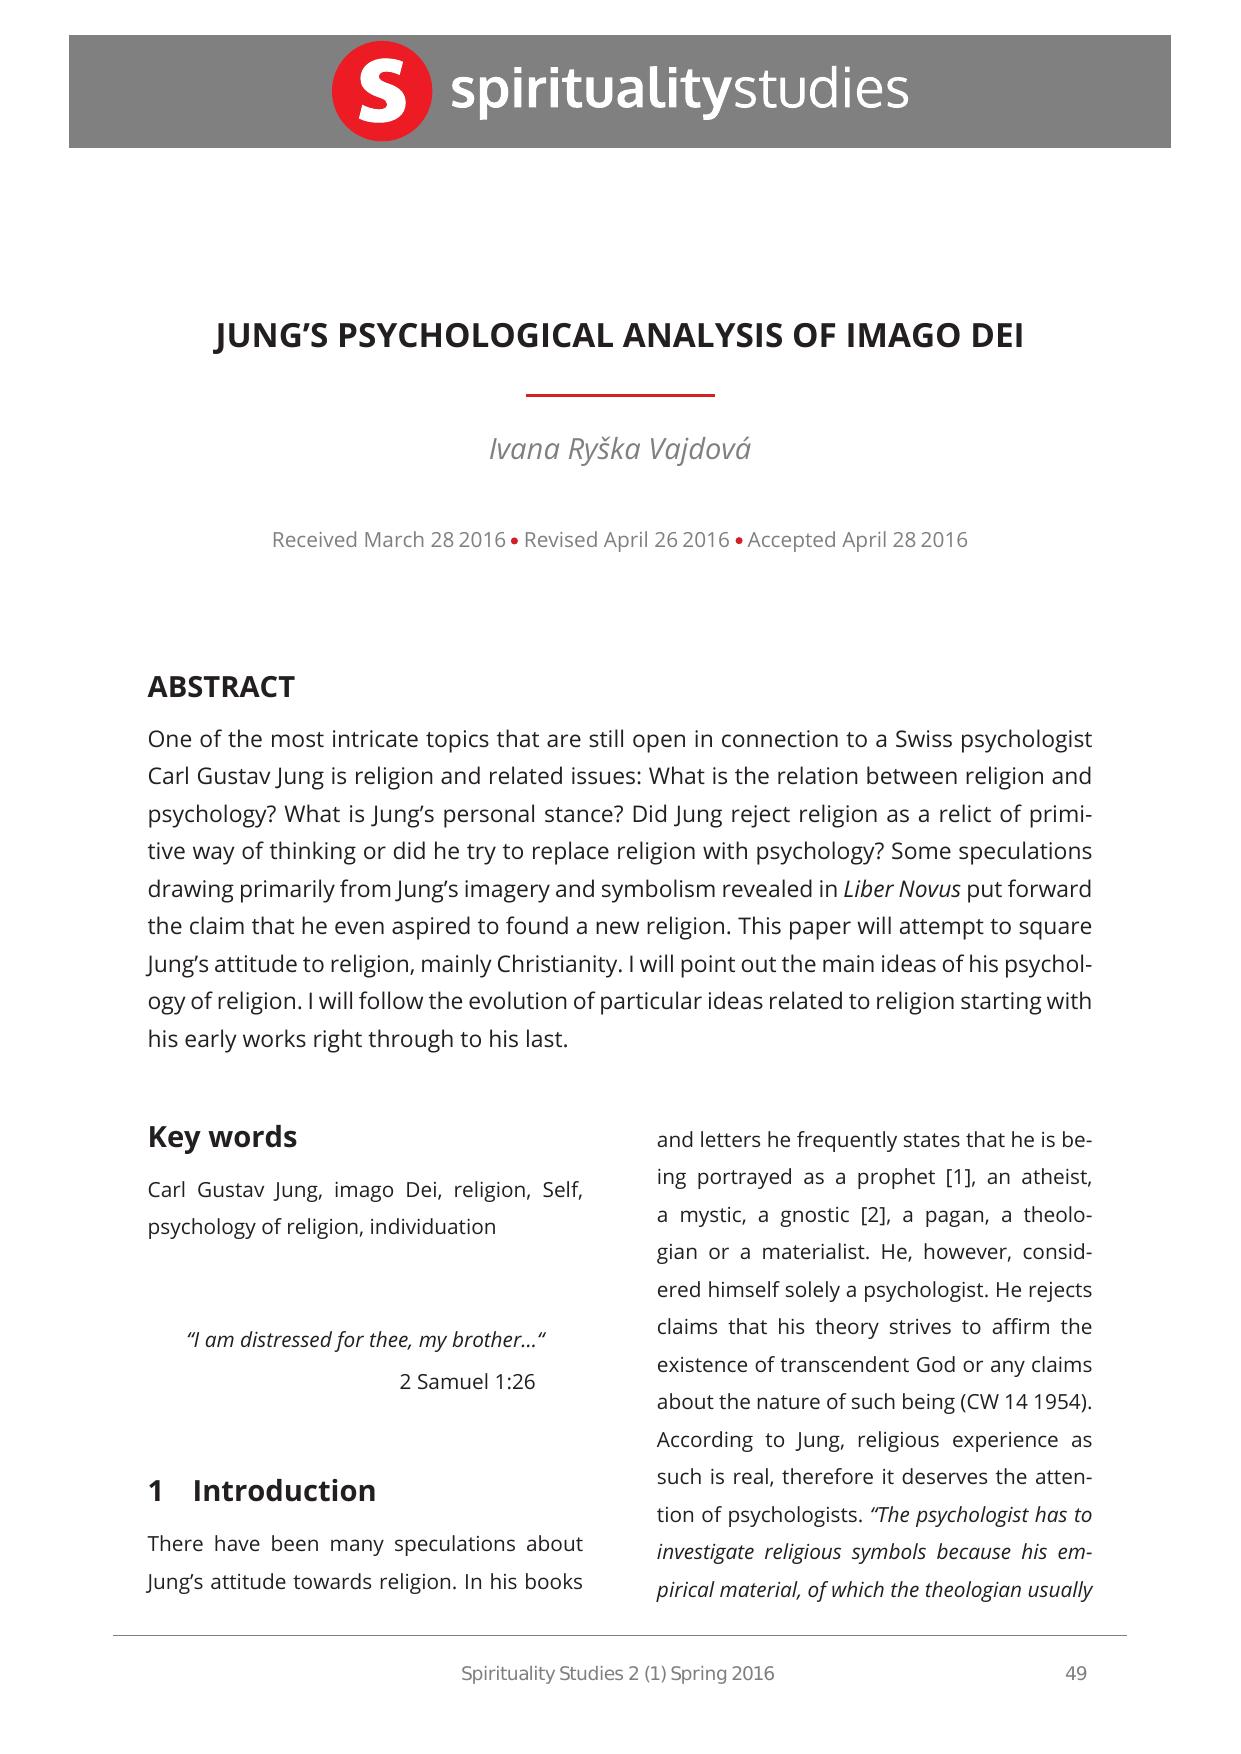 Jung's Phsychologial Analysis of Imago Dei - Paper